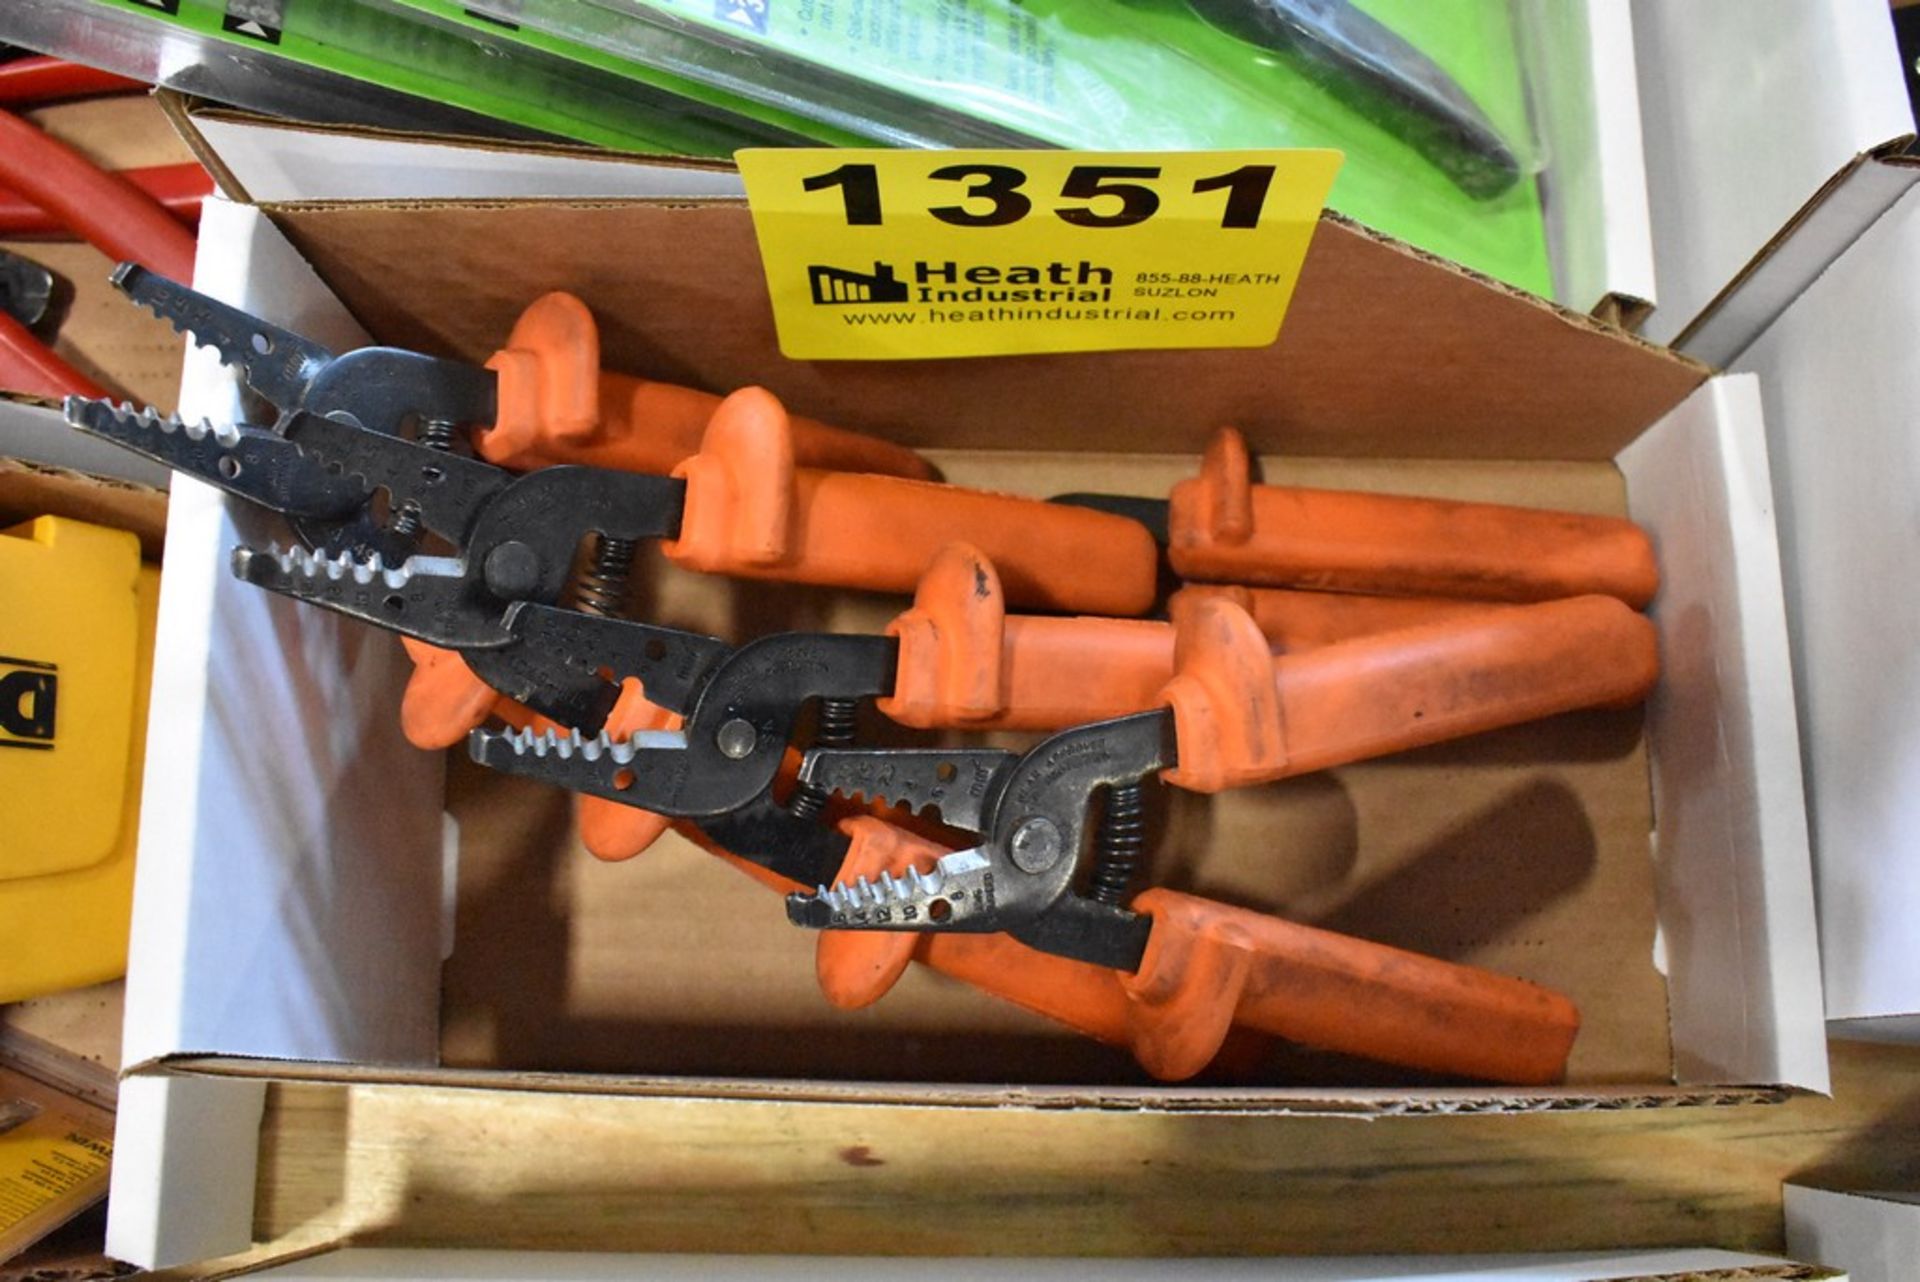 (5) KLEIN INSULATED WIRE STRIPPERS / CUTTERS